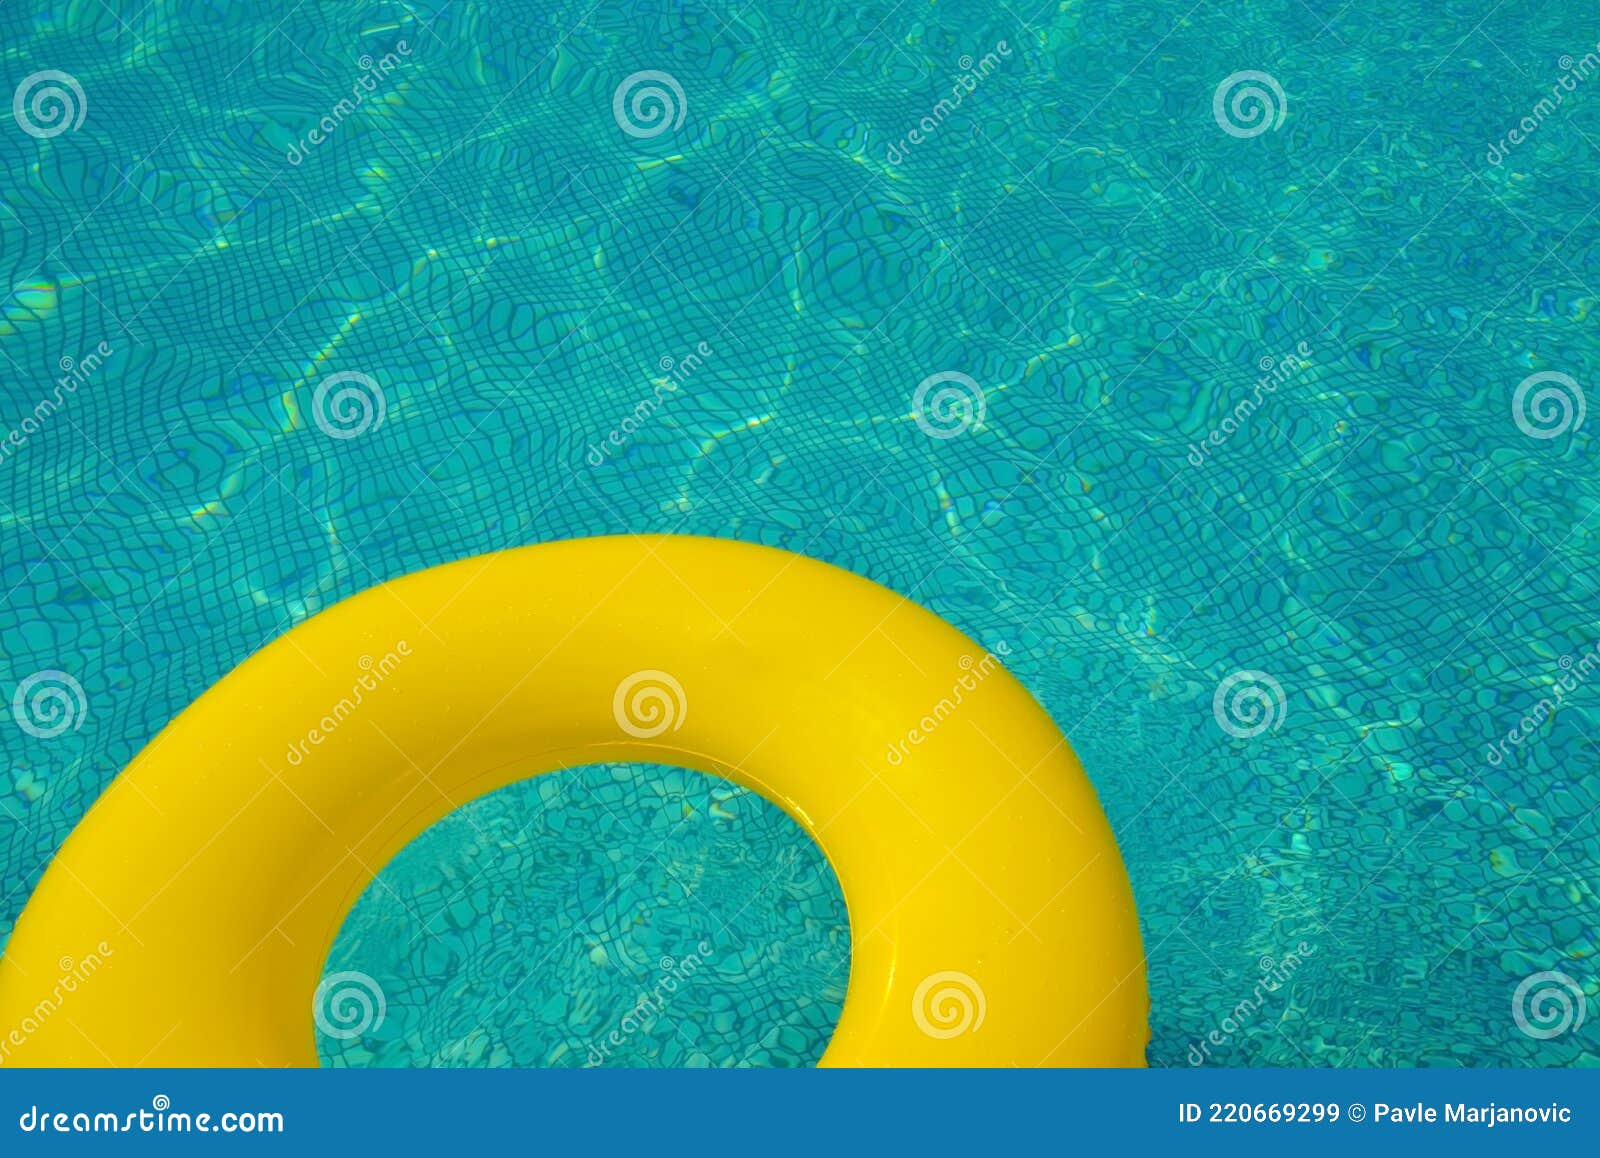 Colorful Tube Floating in a Swimming Pool Stock Image - Image of ...